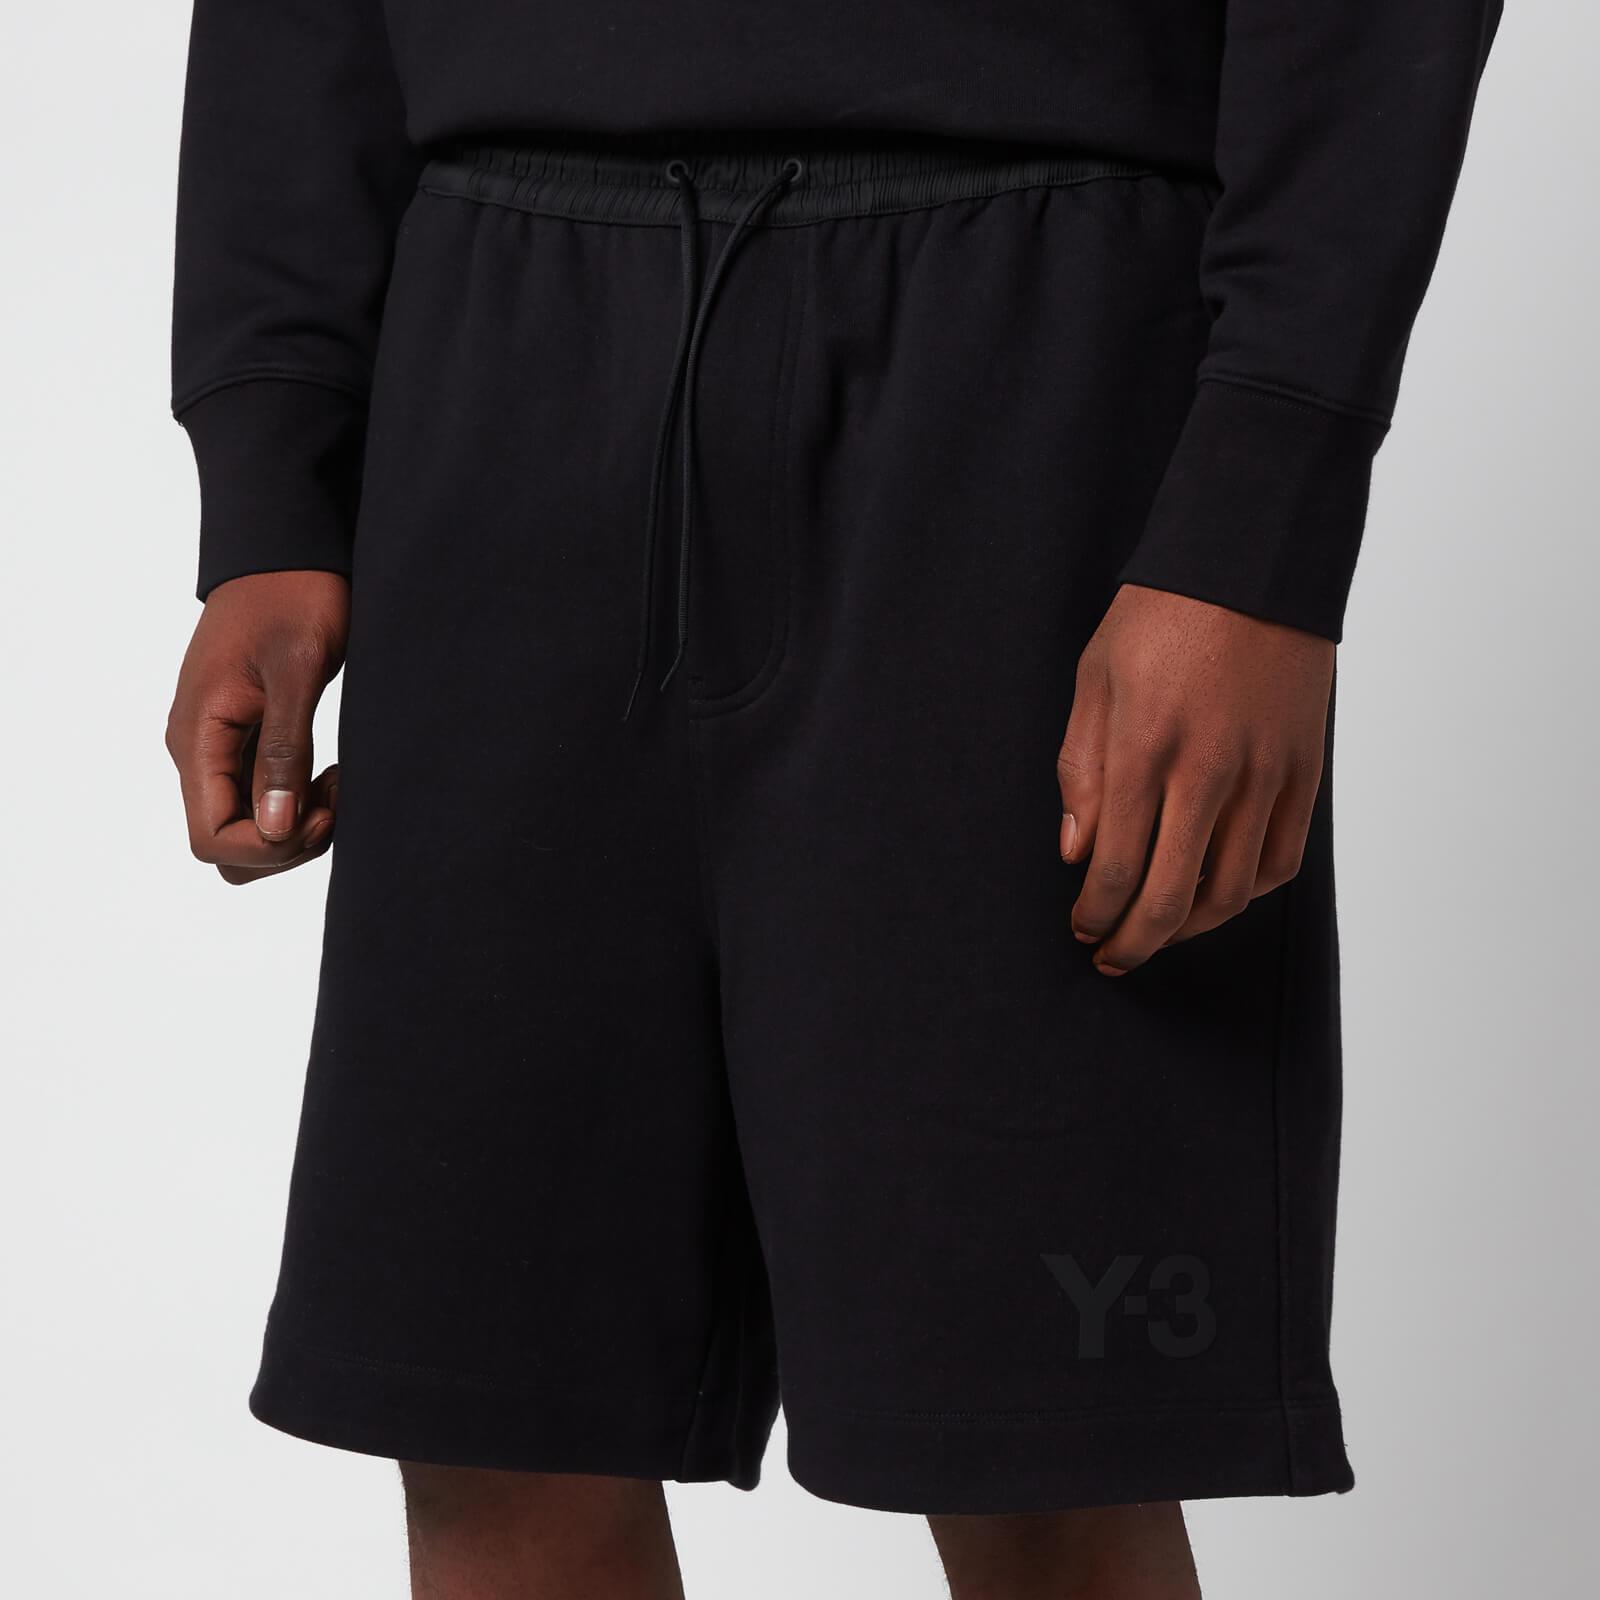 Y-3 Classic Terry Shorts in Black for Men - Lyst